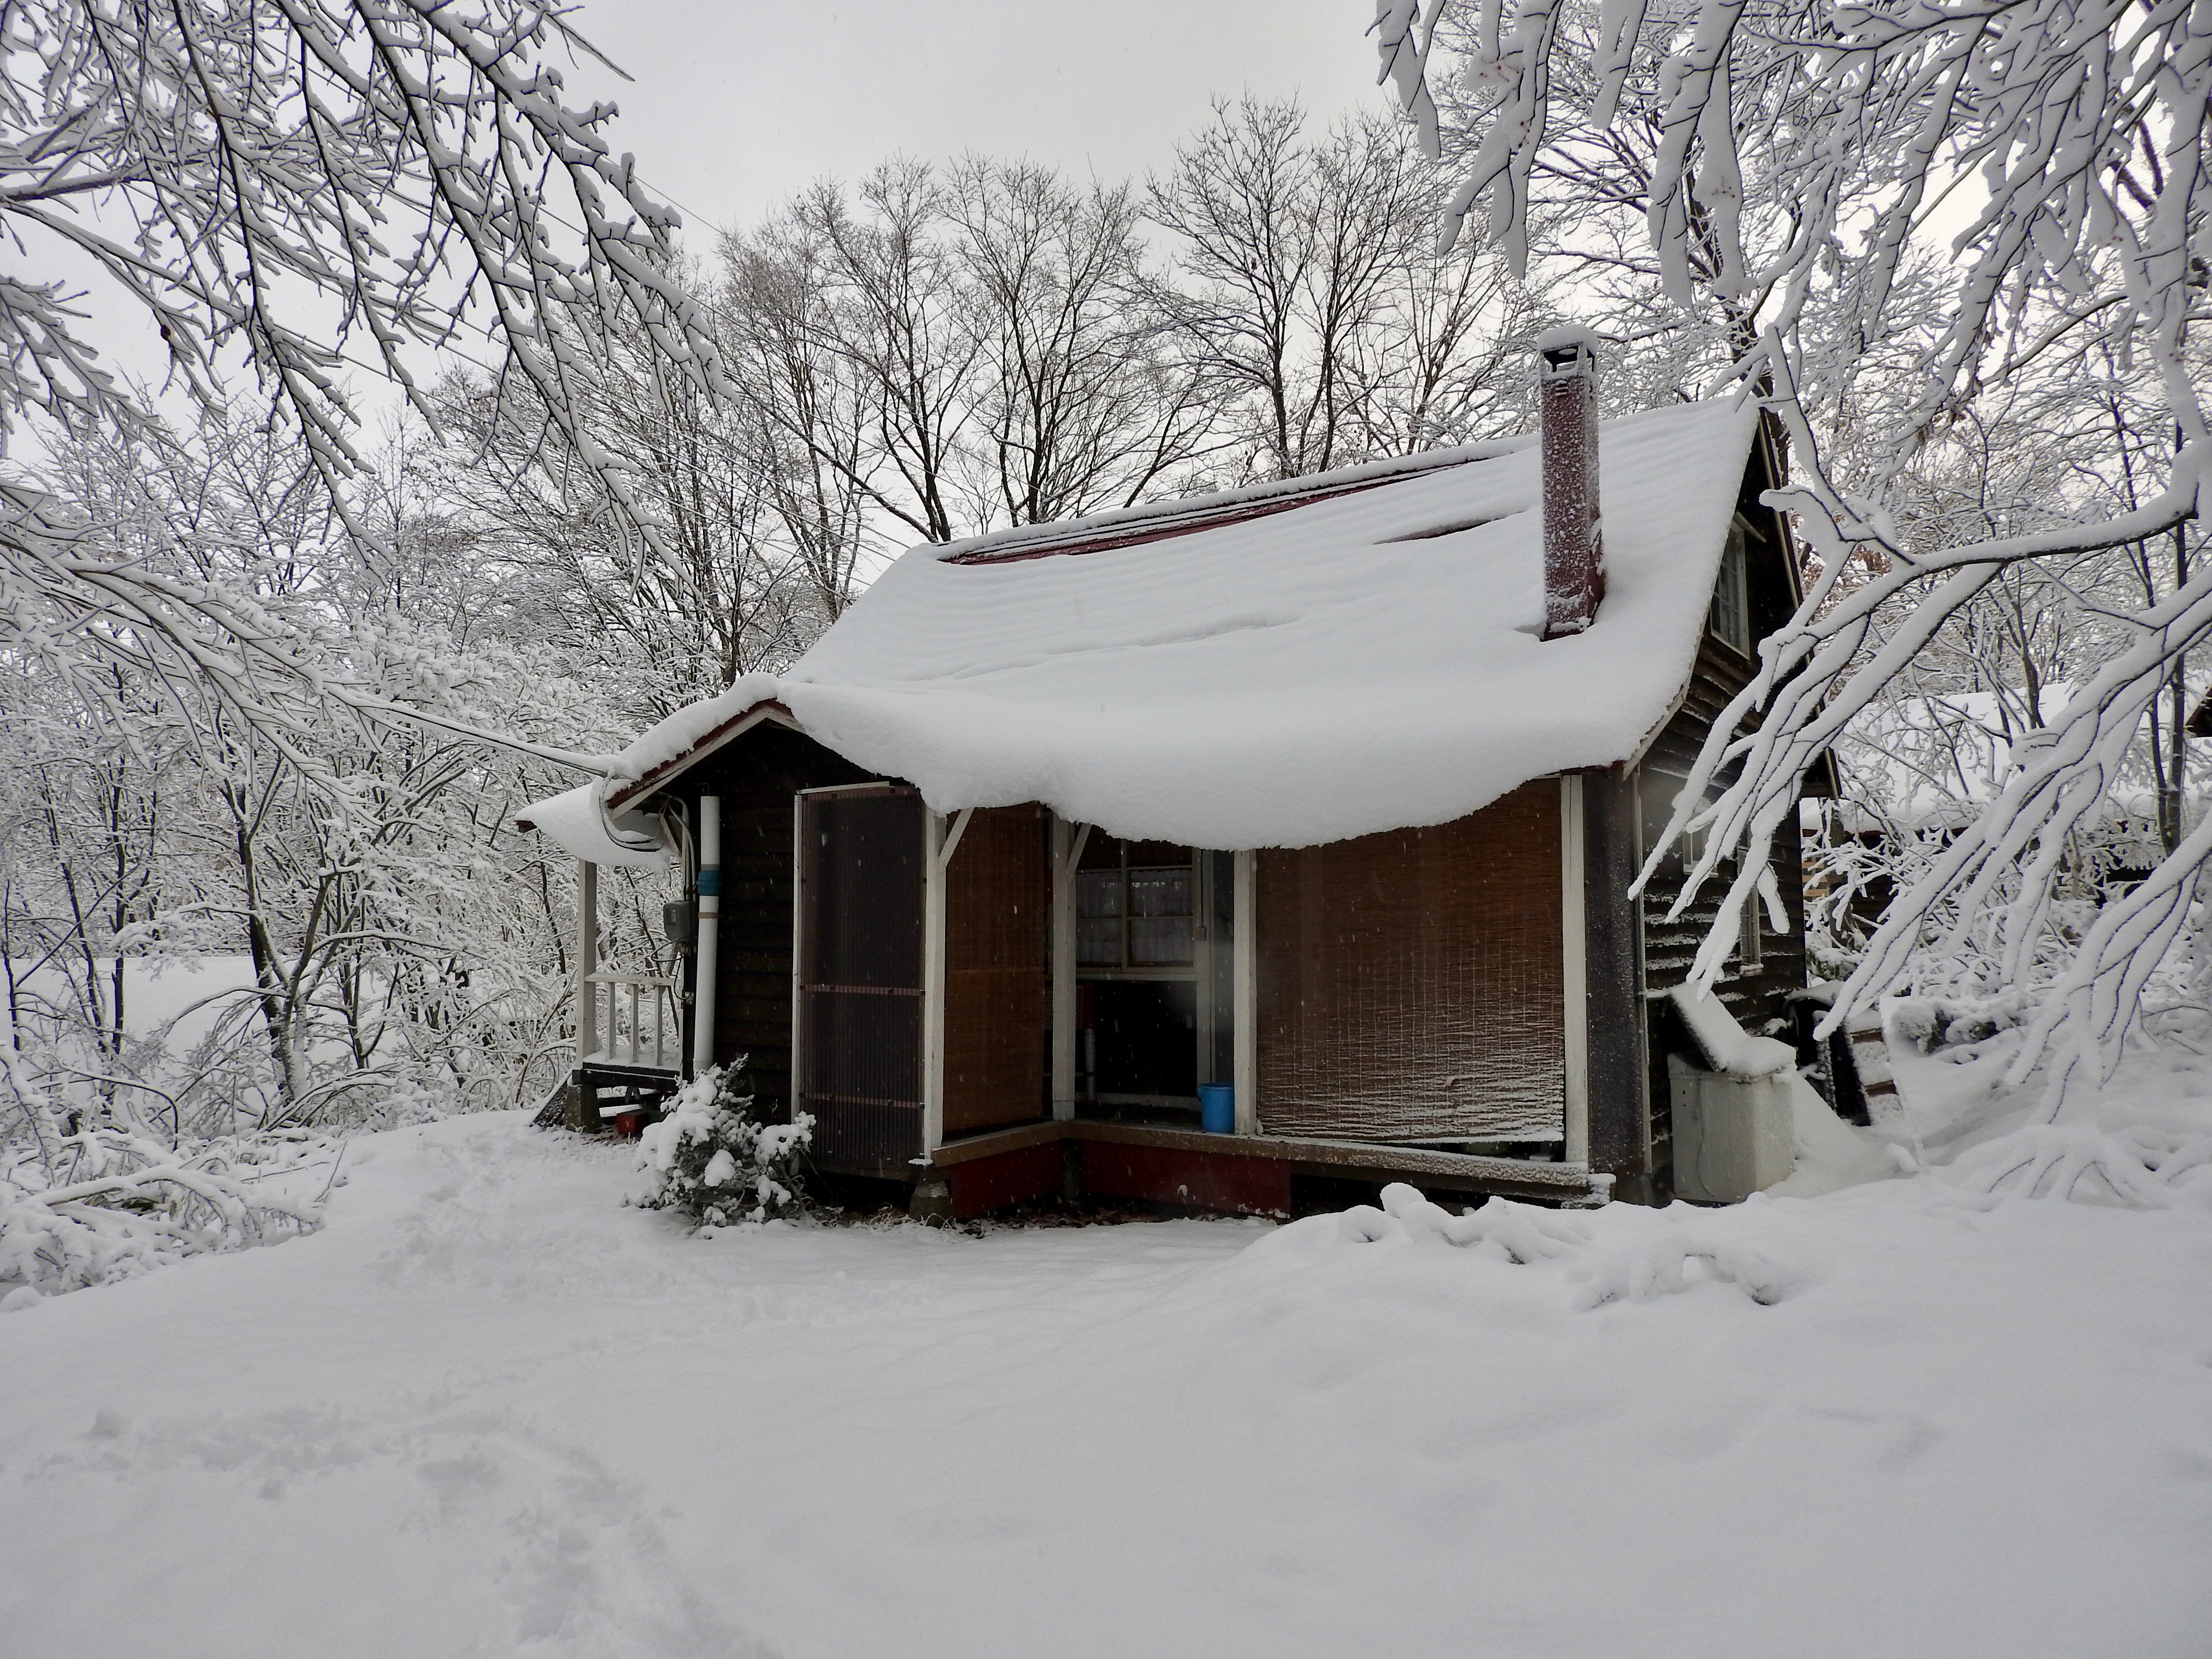 A cabin in the winter